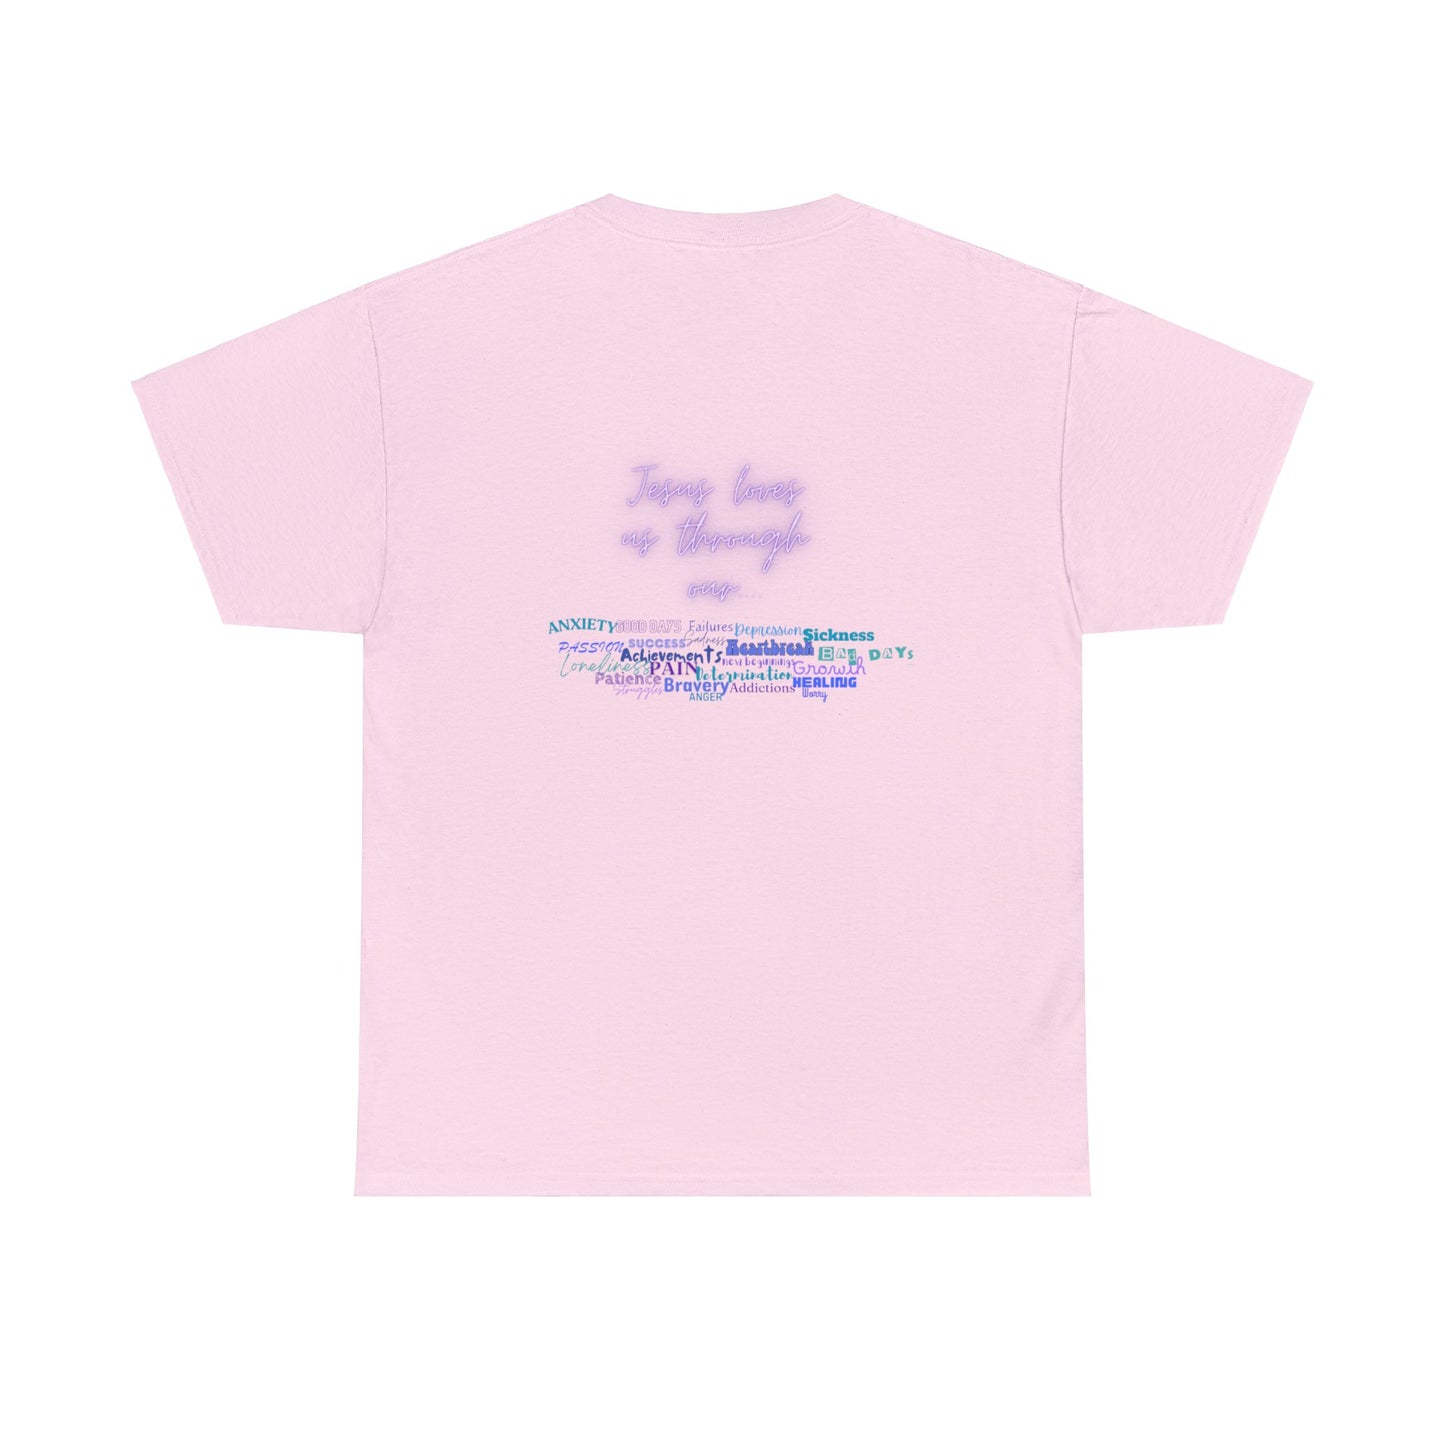 Tangible Truths Cotton Tee